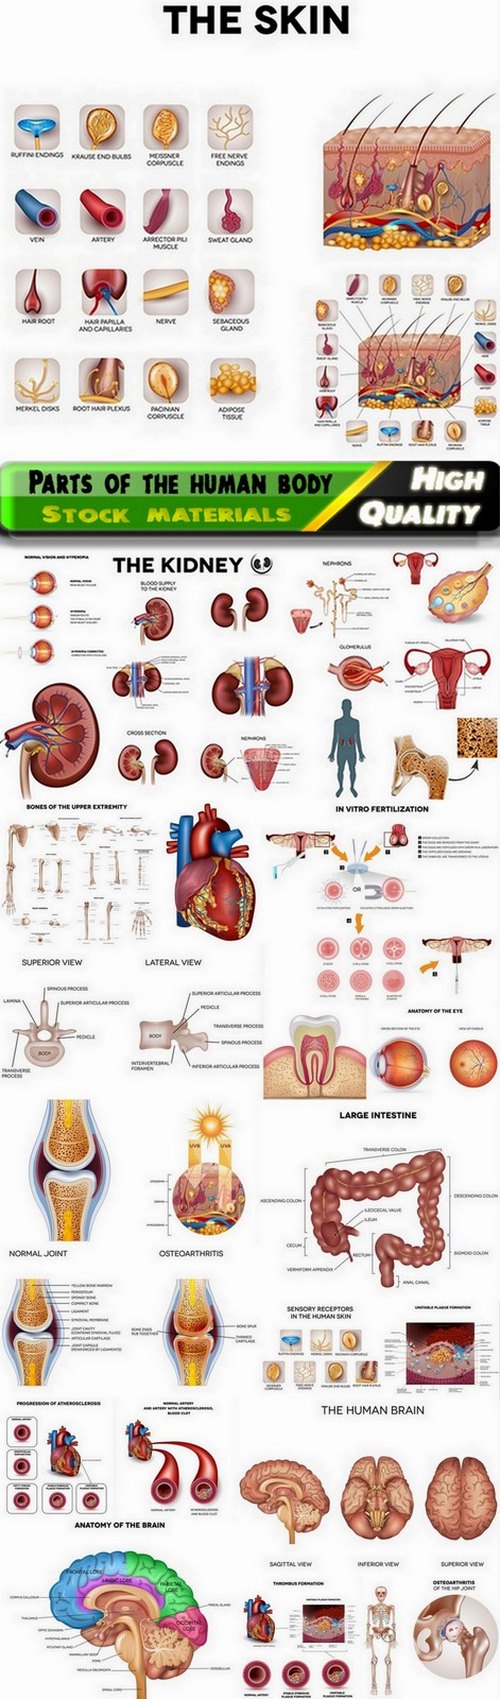 Parts of the human body and their diseases - 25 Eps